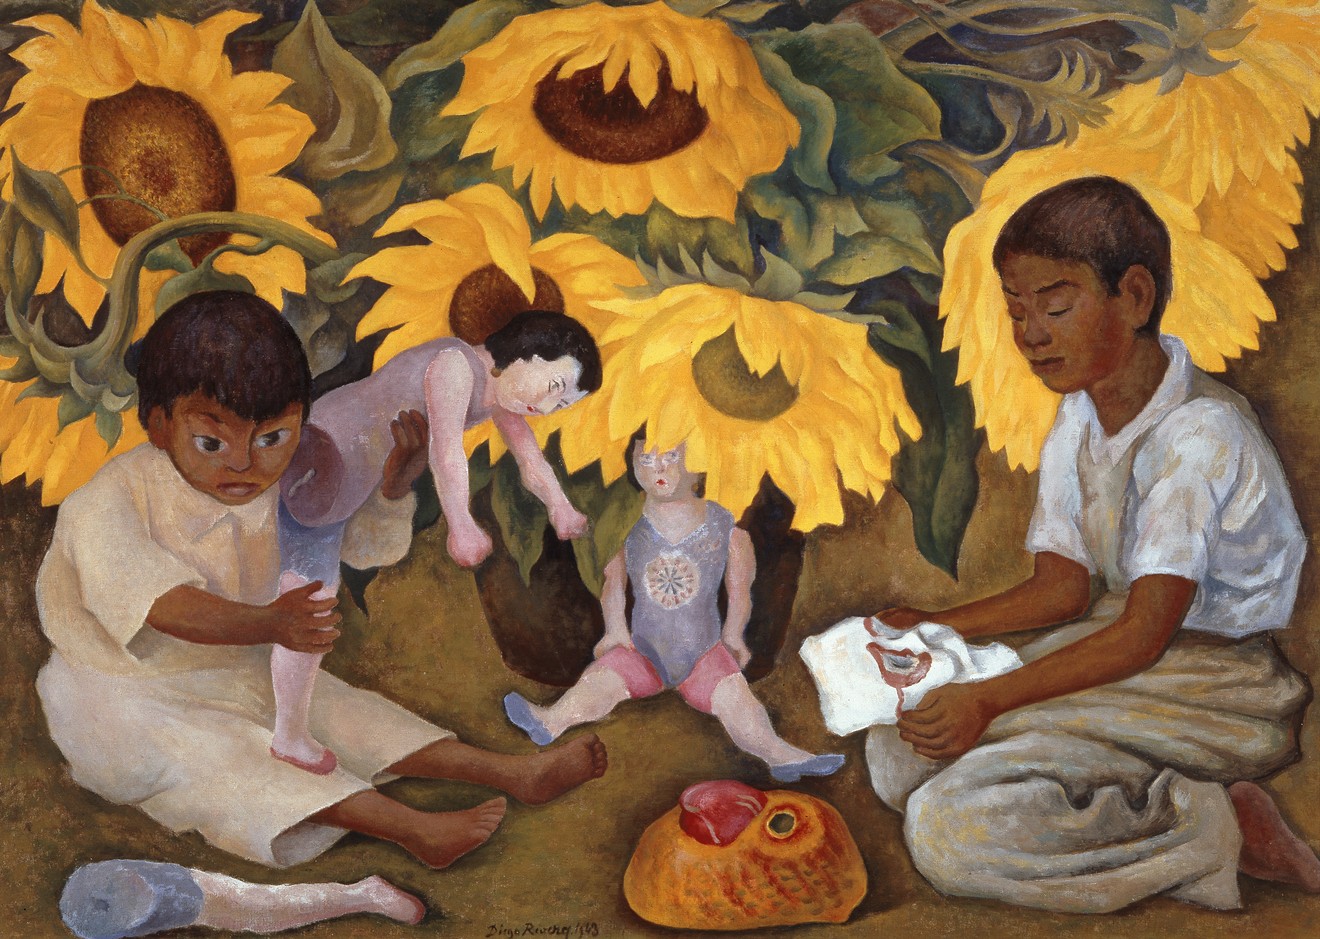 Diego Rivera's Sunflowers (1943) is part of "Frida Kahlo and Diego Rivera" at the Heard Museum.